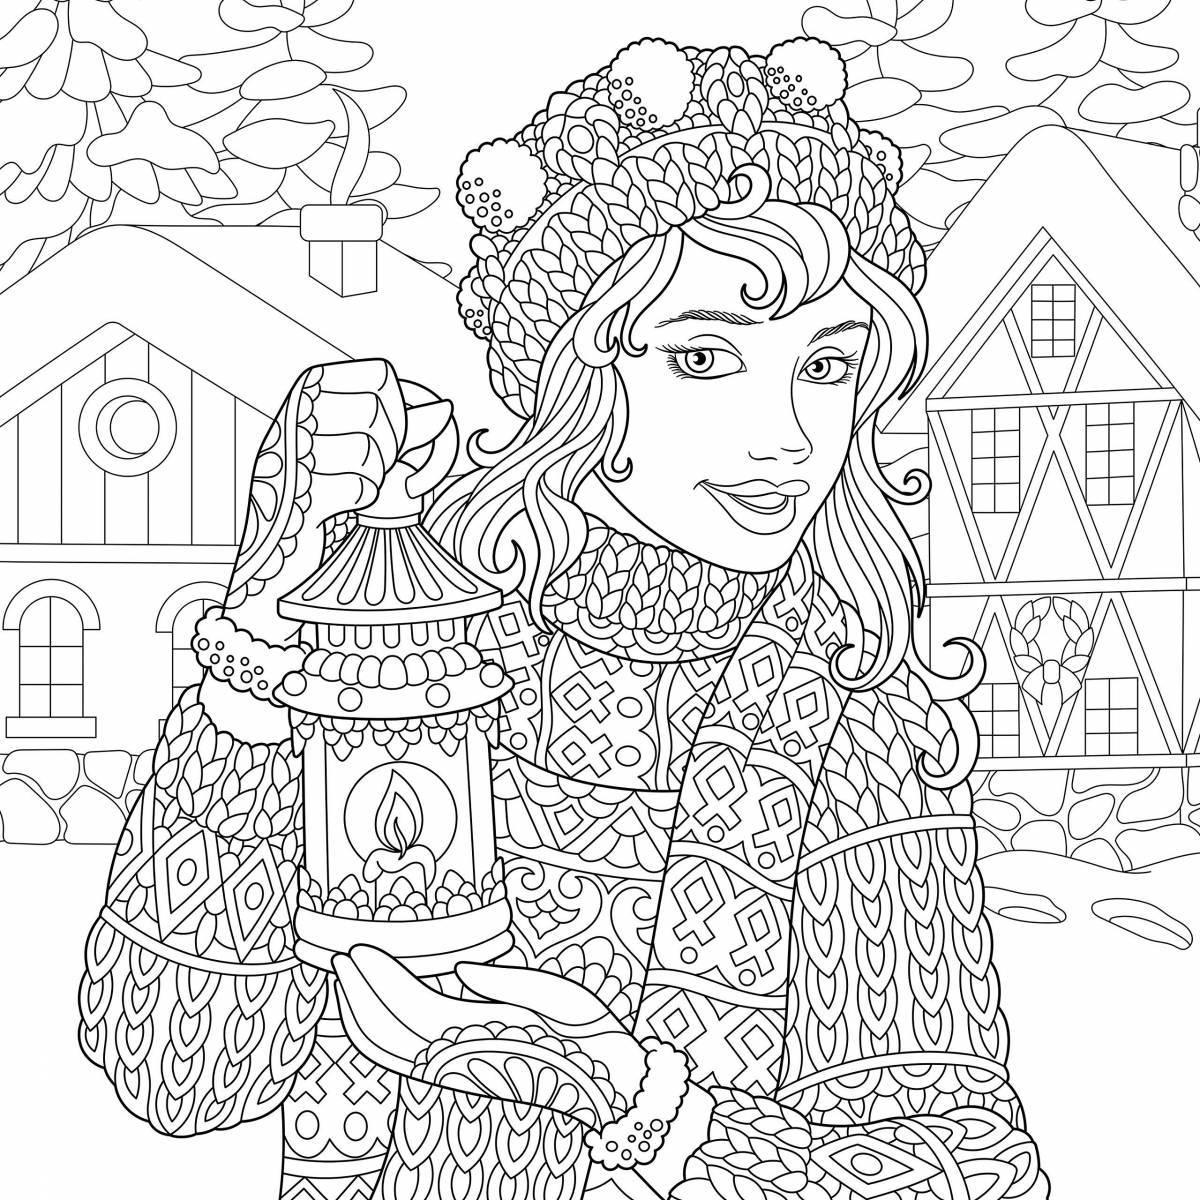 Fascinating Christmas complex coloring book